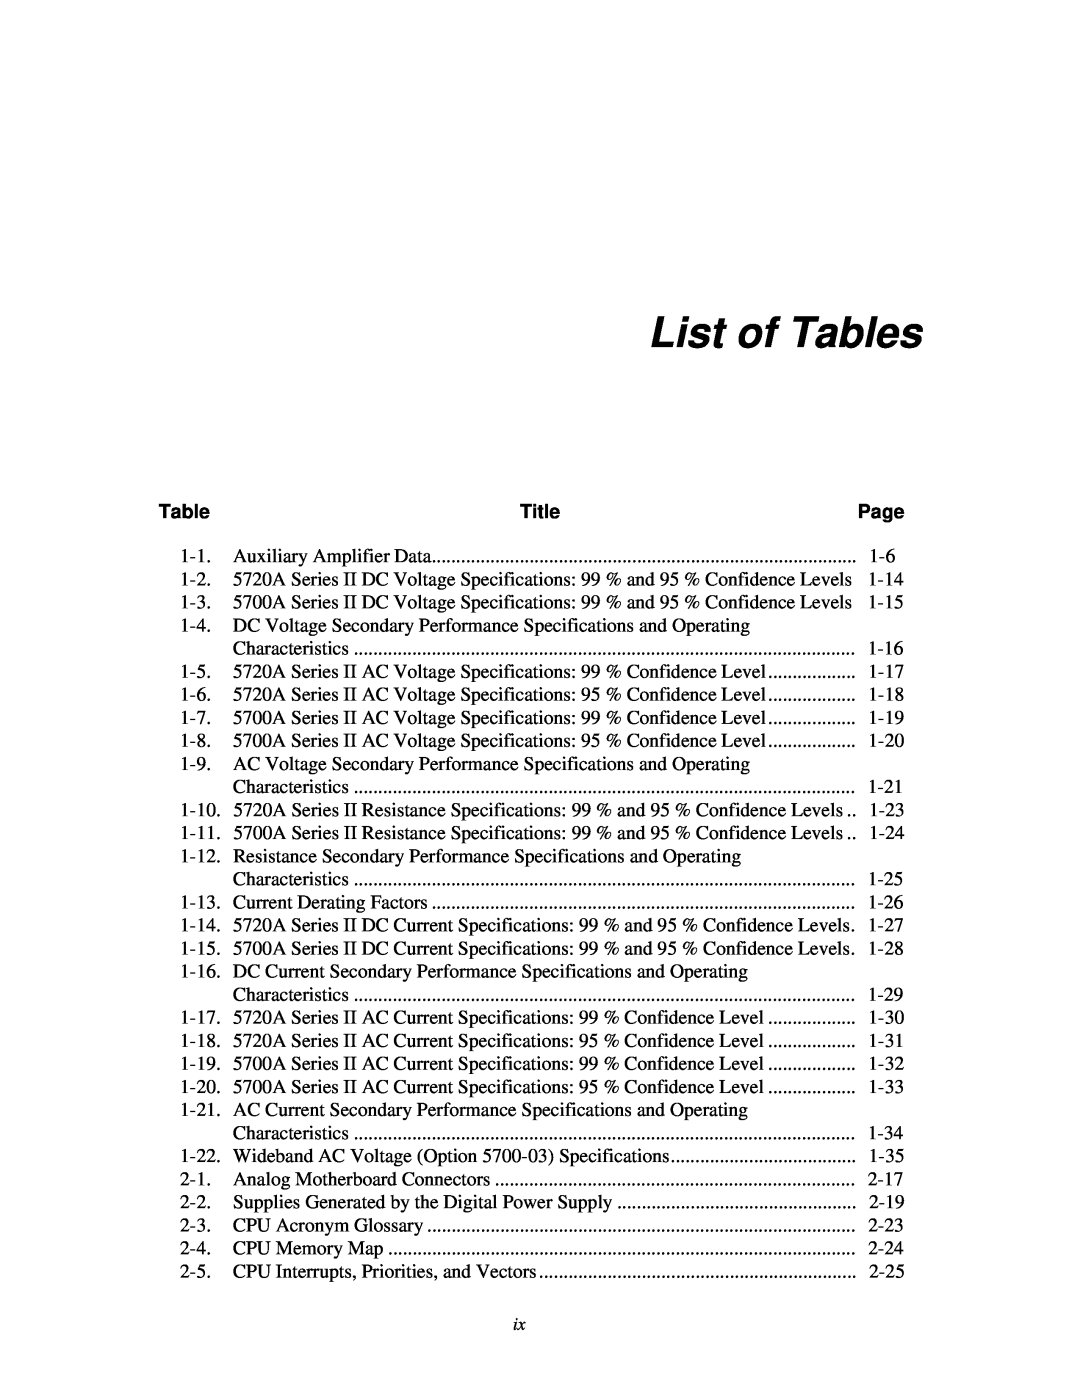 Fluke 5720A service manual List of Tables, Title, Page 